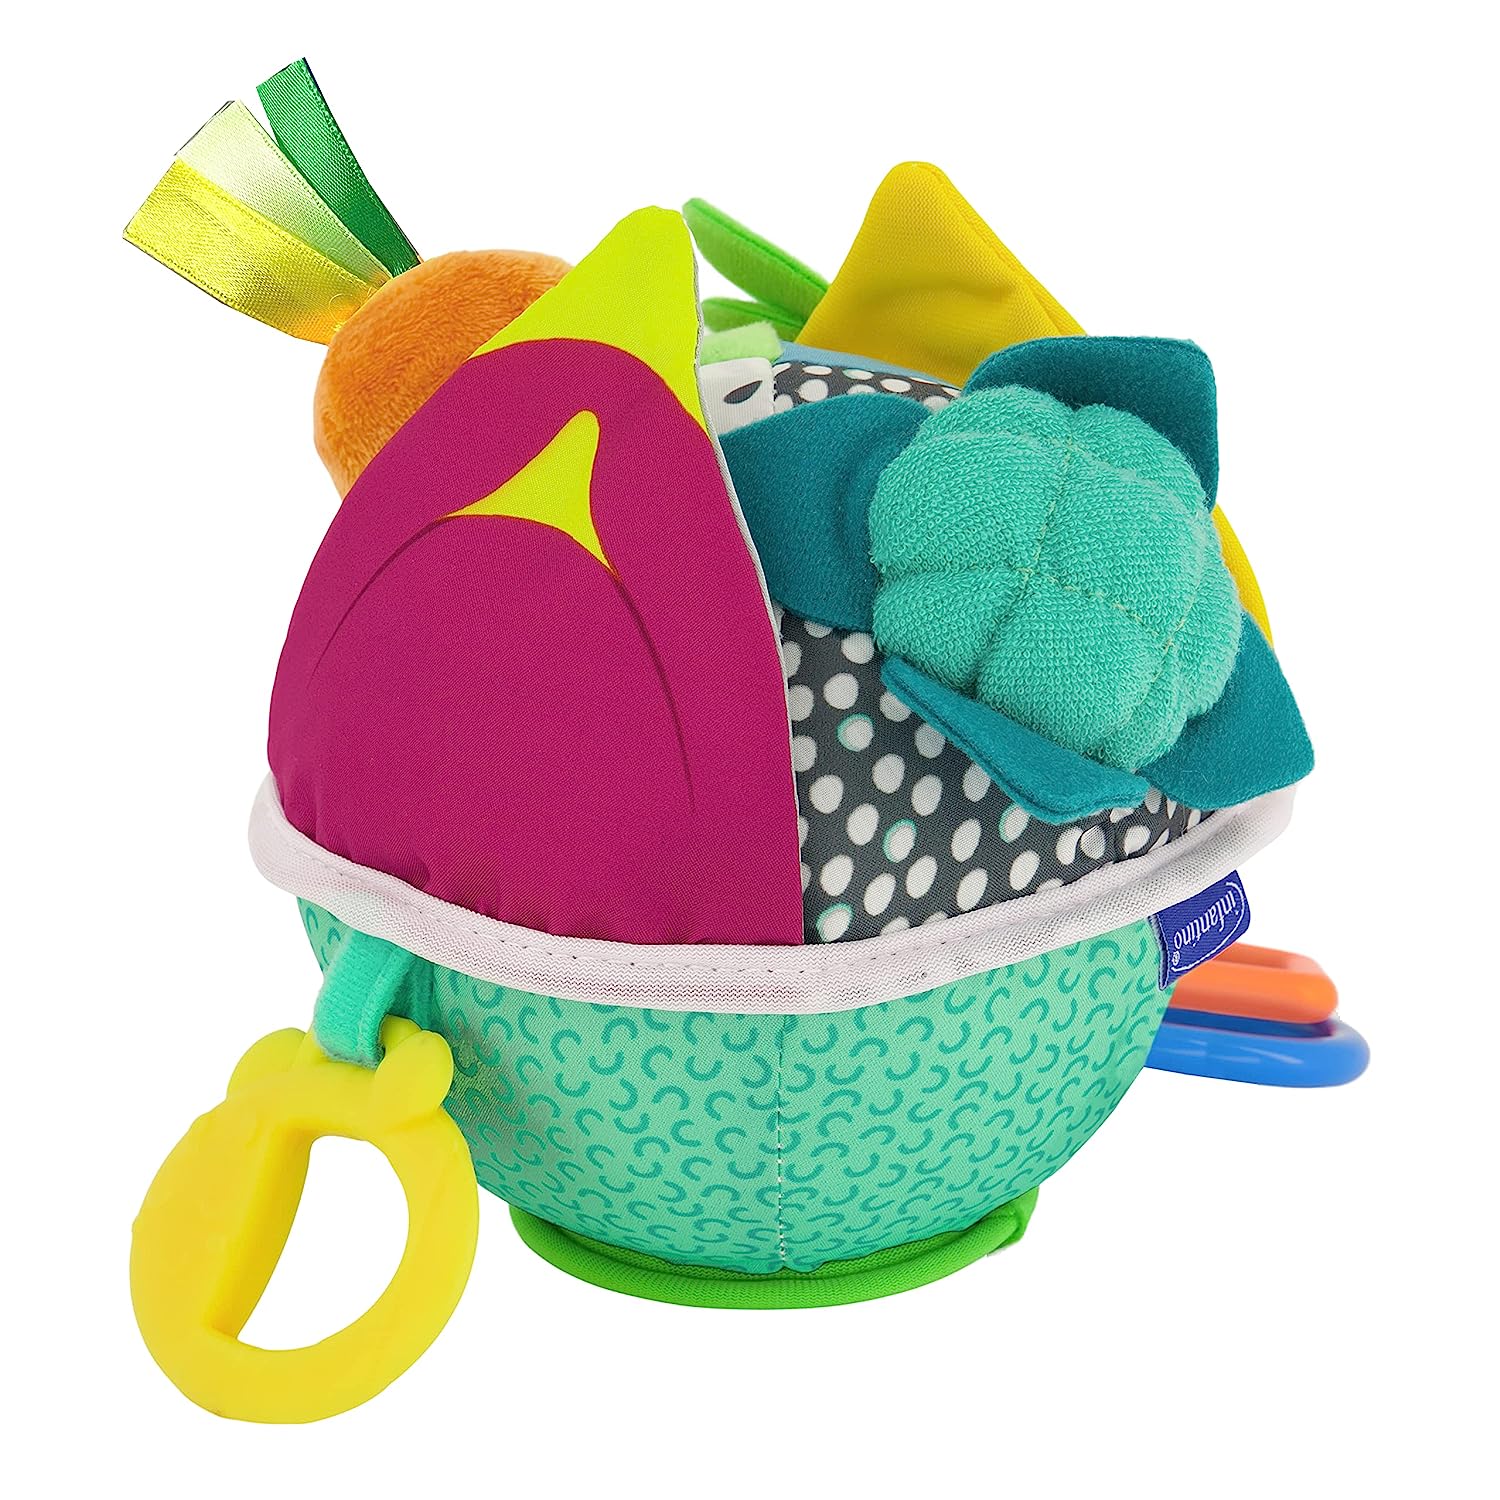 Infantino Busy Lil’ Sensory Ball - 9 Activities, Teether, Selfie Mirror, Rattle Sounds, Encourages Fine and Gross Motor Skill Development, for Babies 3M+.